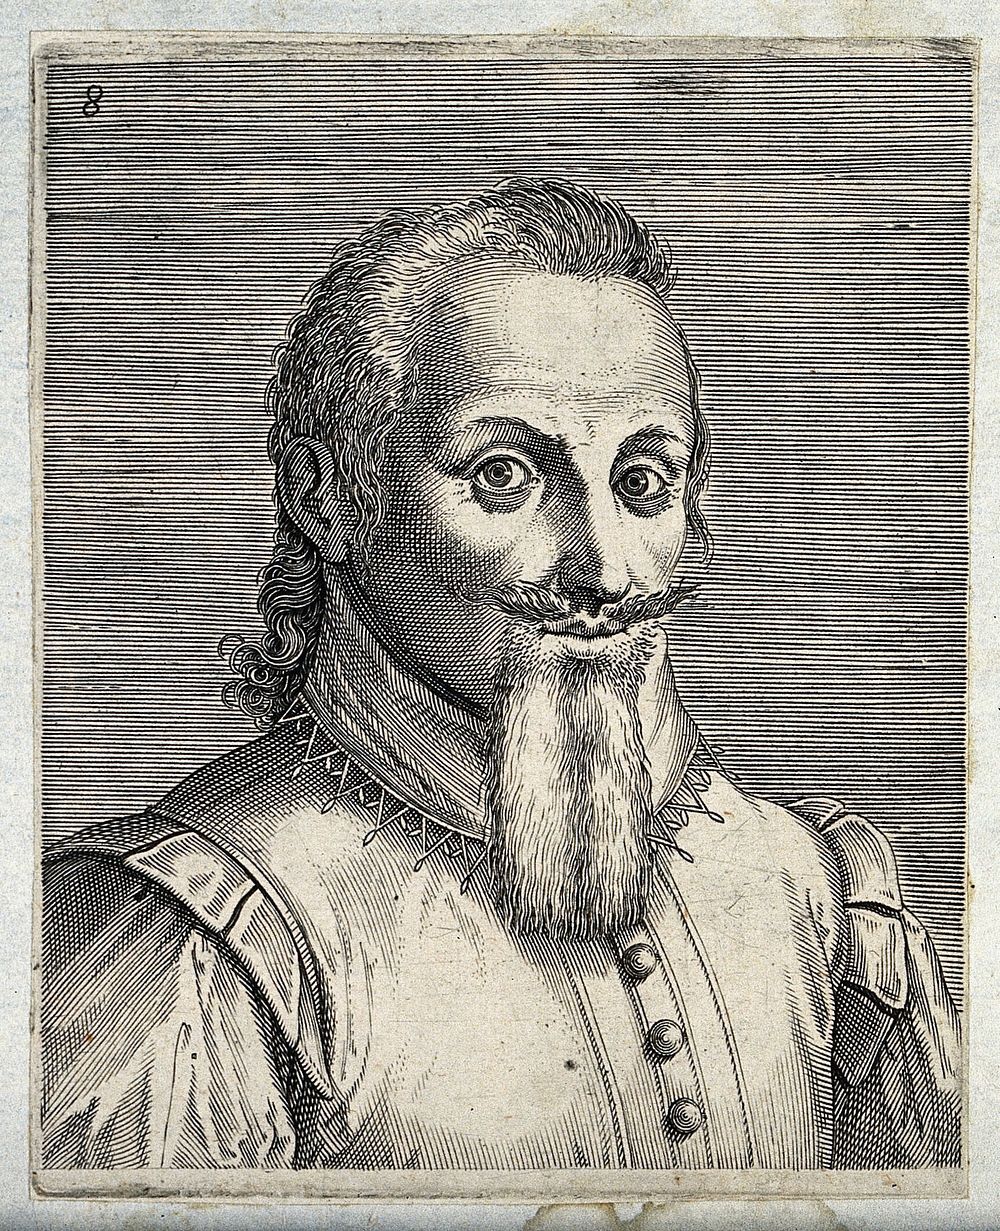 The head and a shoulders of a man with a long beard and a moustache that is combed upwards. Engraving by P. Galle.